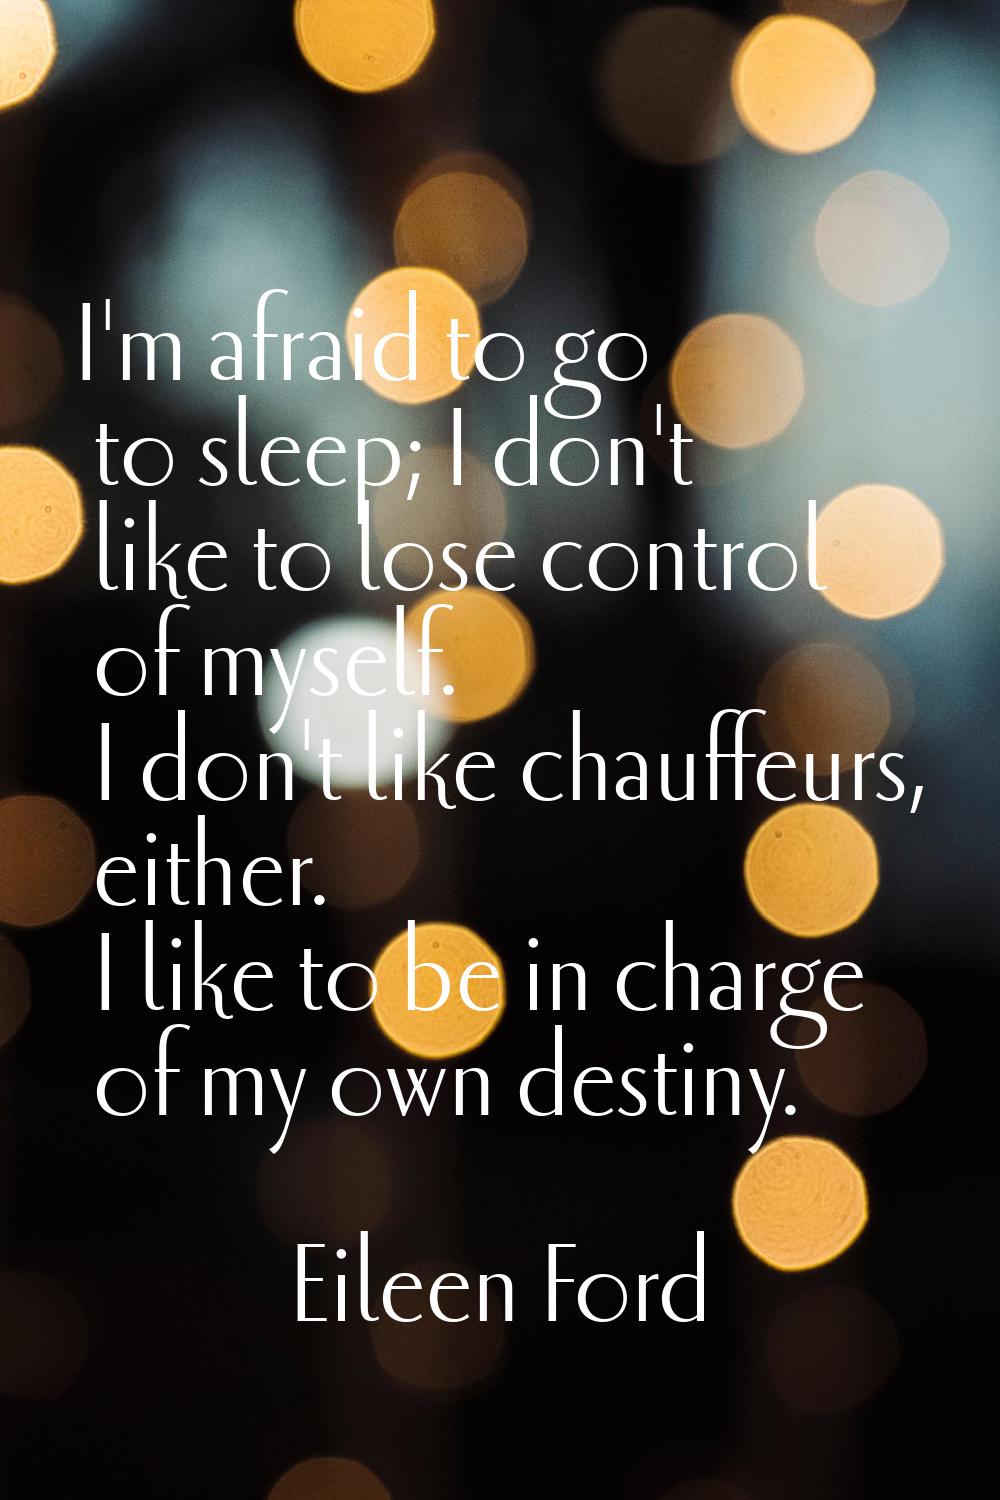 I'm afraid to go to sleep; I don't like to lose control of myself. I don't like chauffeurs, either.